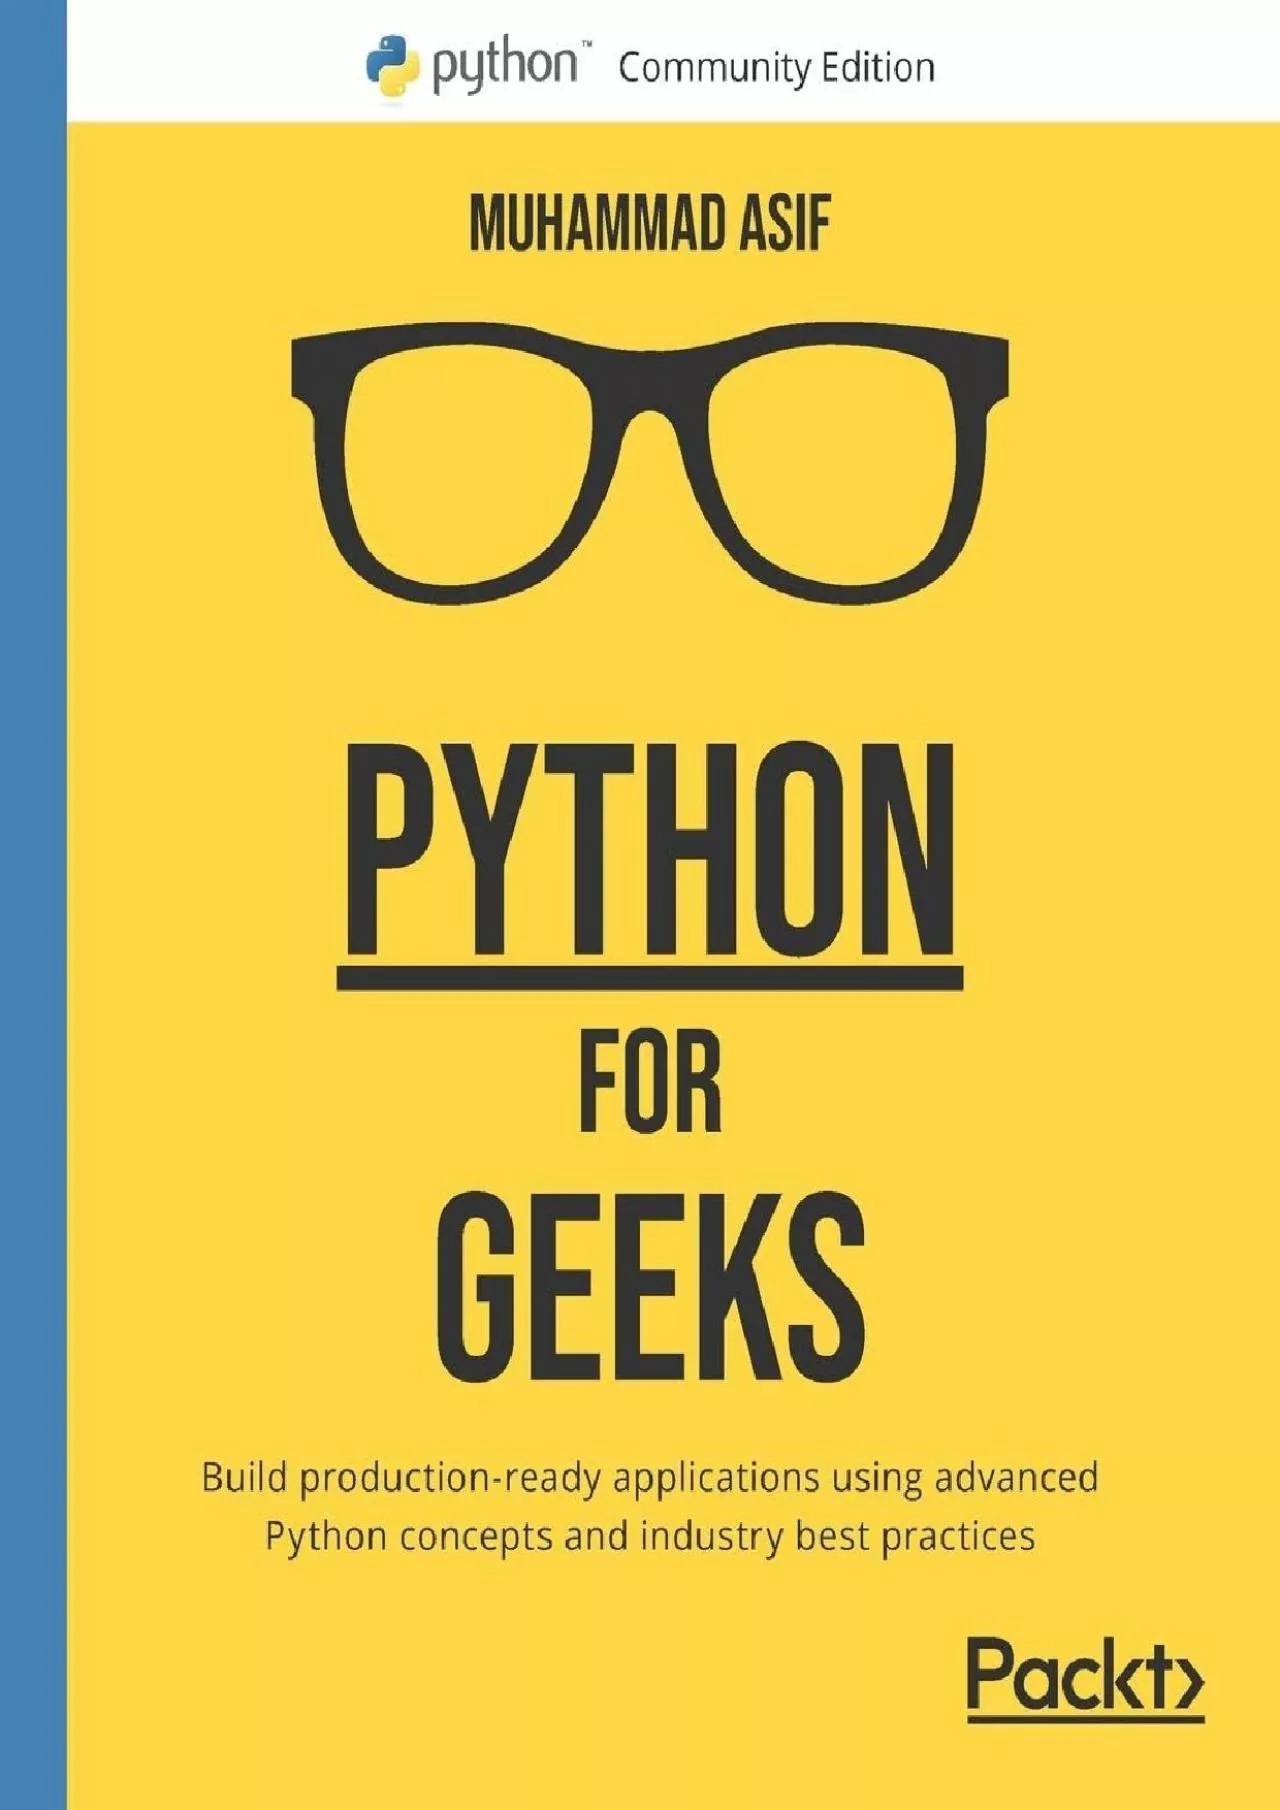 Python for Geeks: Build production-ready applications using advanced Python concepts and